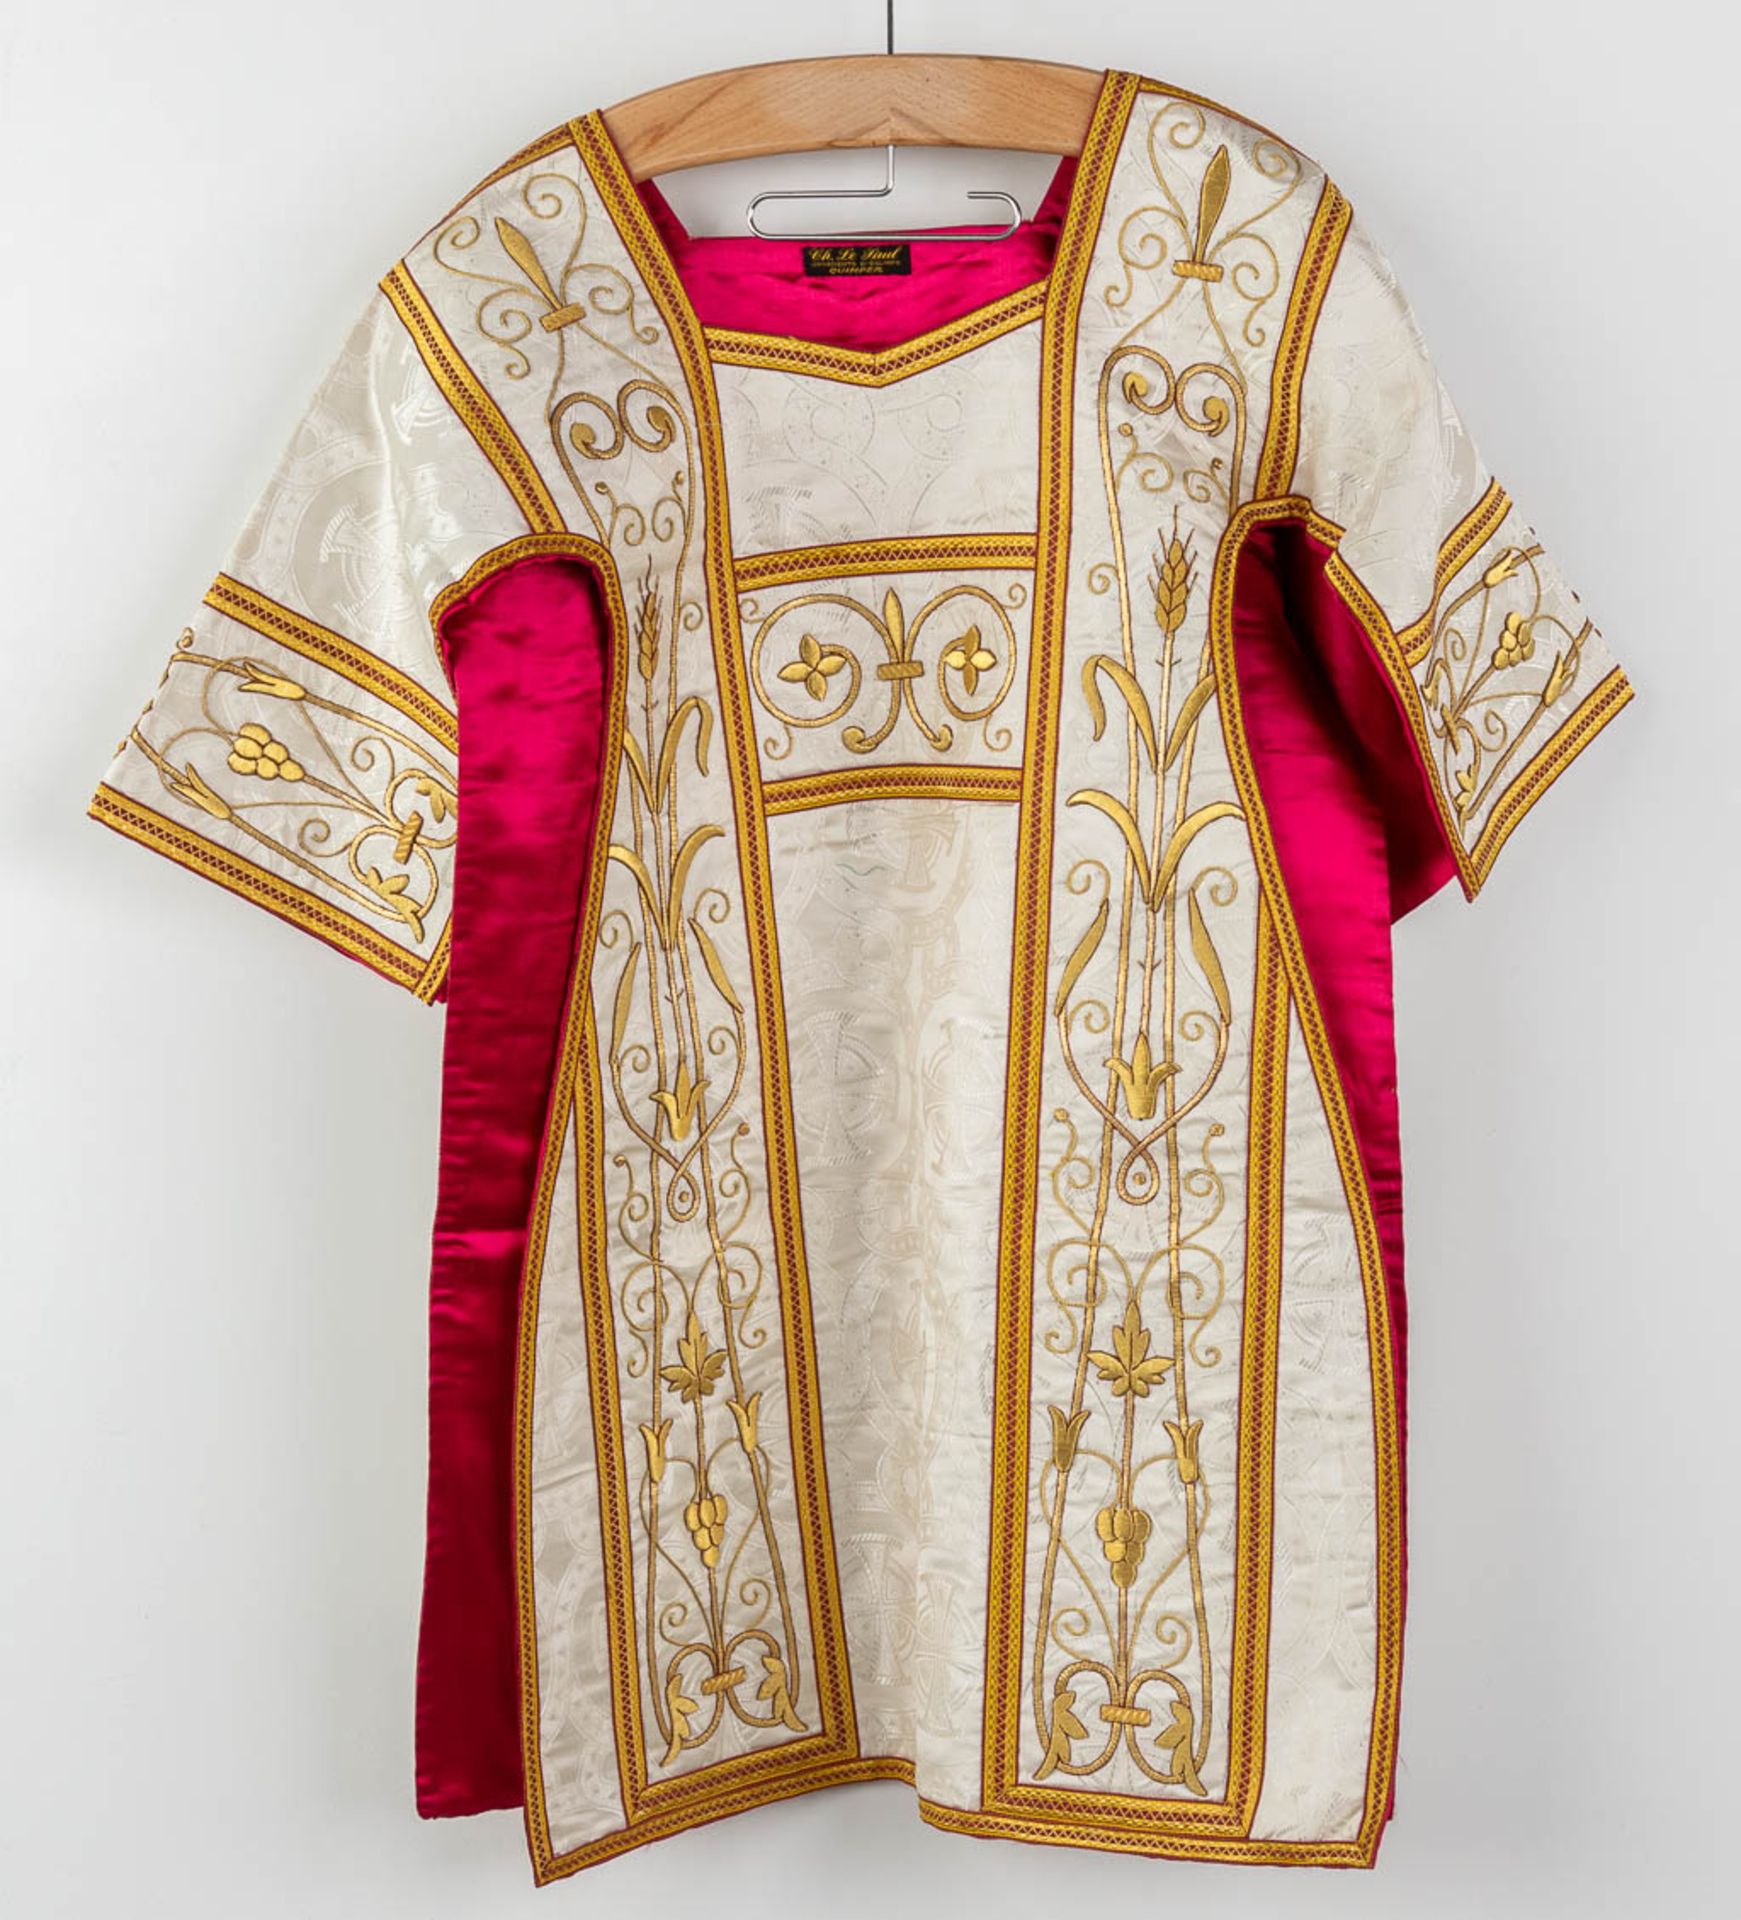 A matching set of Liturgical robes, 4 dalmatics, maniples and stola. - Image 9 of 17